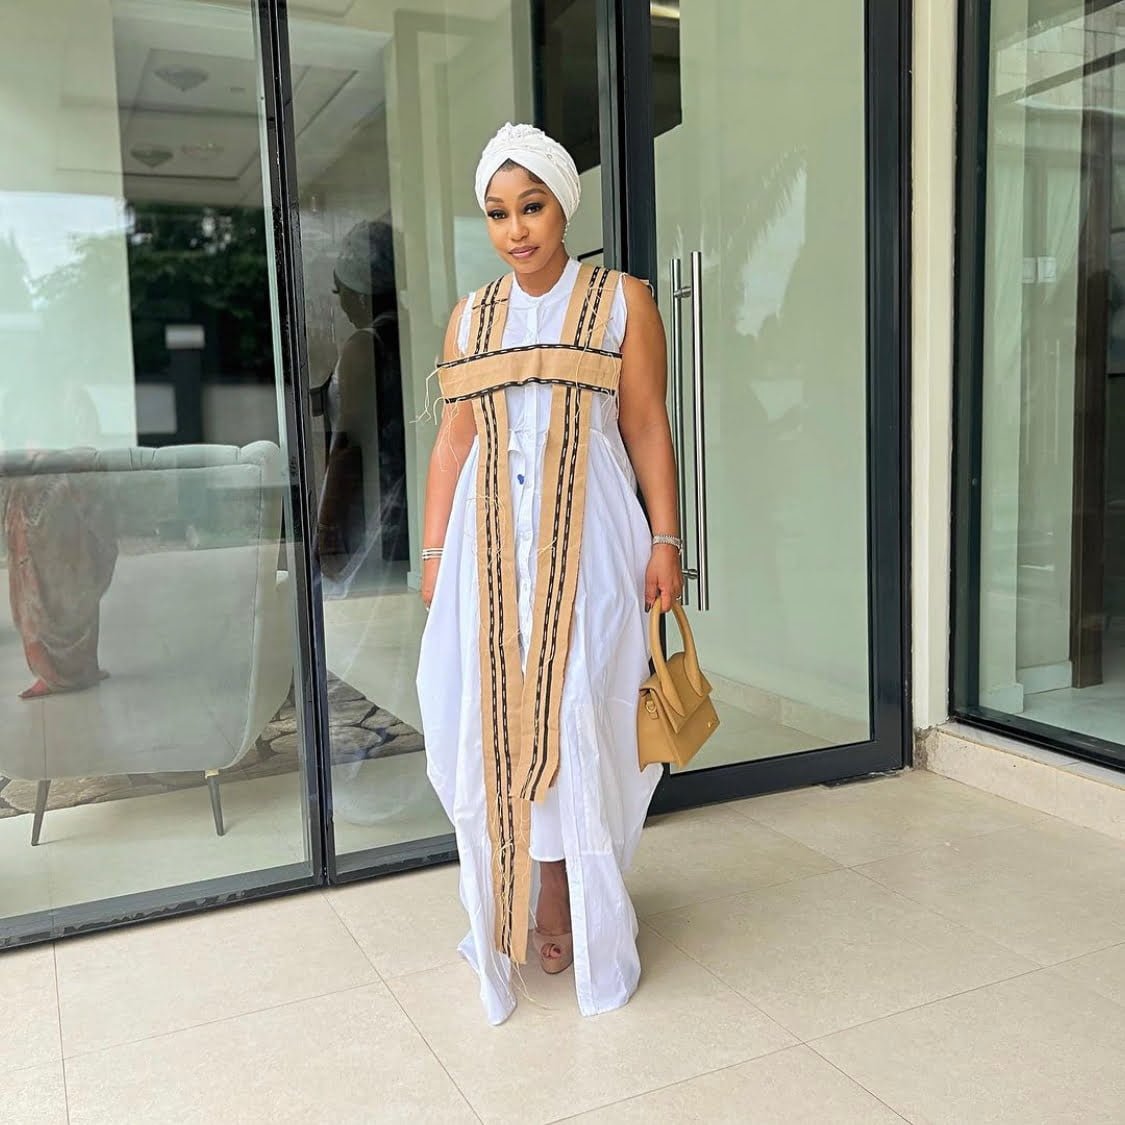 Rita Dominic displaying the importance of color combination in a rich and classy white and brown outfit.